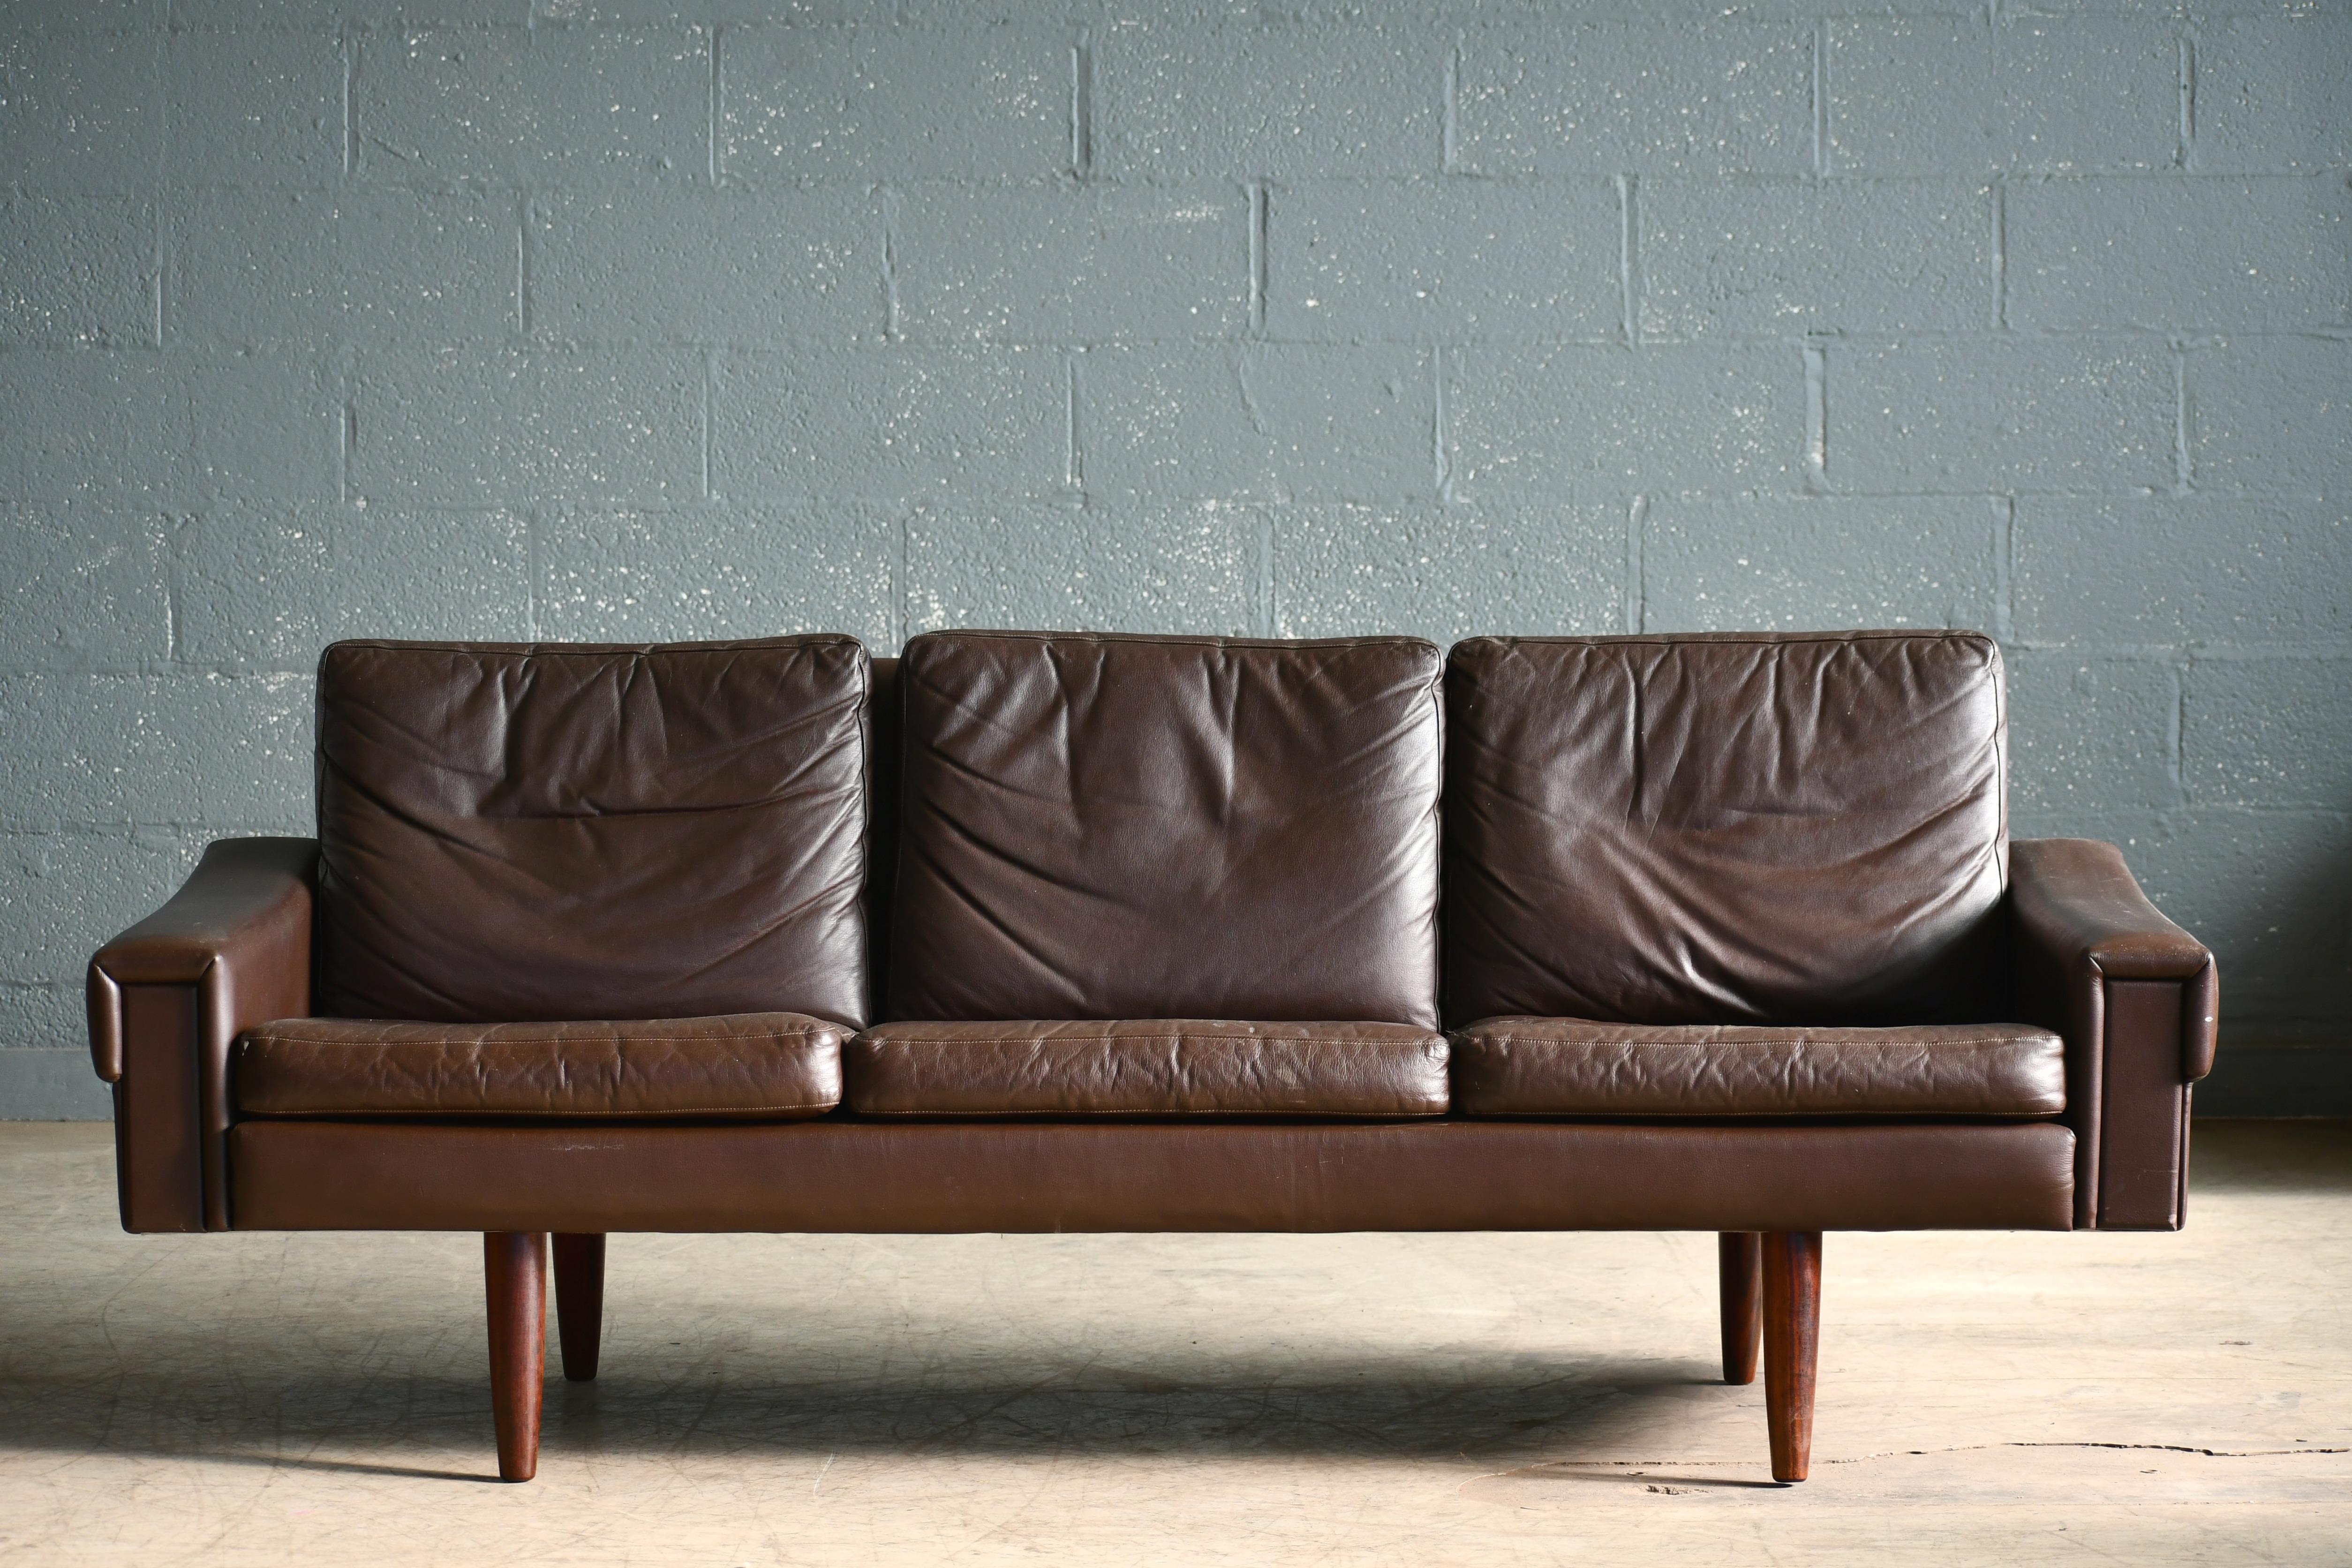 Classic Danish midcentury three-seat leather sofa in a nice warm chestnut color designed by Georg Thams in the 1960s and manufactured by Vejen Polstermobelfabrik in Denmark. Very elegant yes relaxed with leather inserts on the front of the armrests